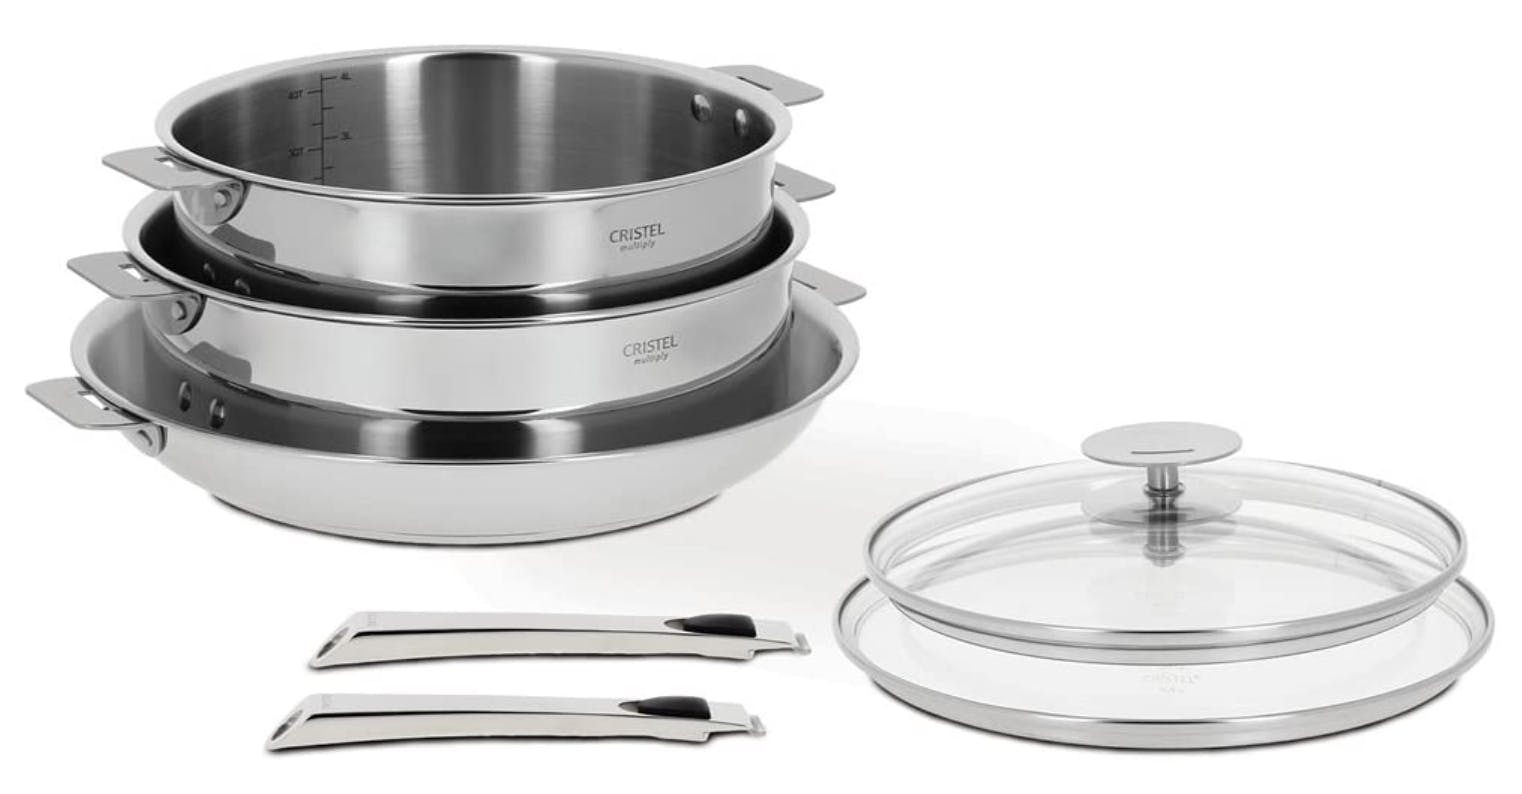 AFFINITY 5-ply Stainless Steel Signature Cookware Set 7 Pieces